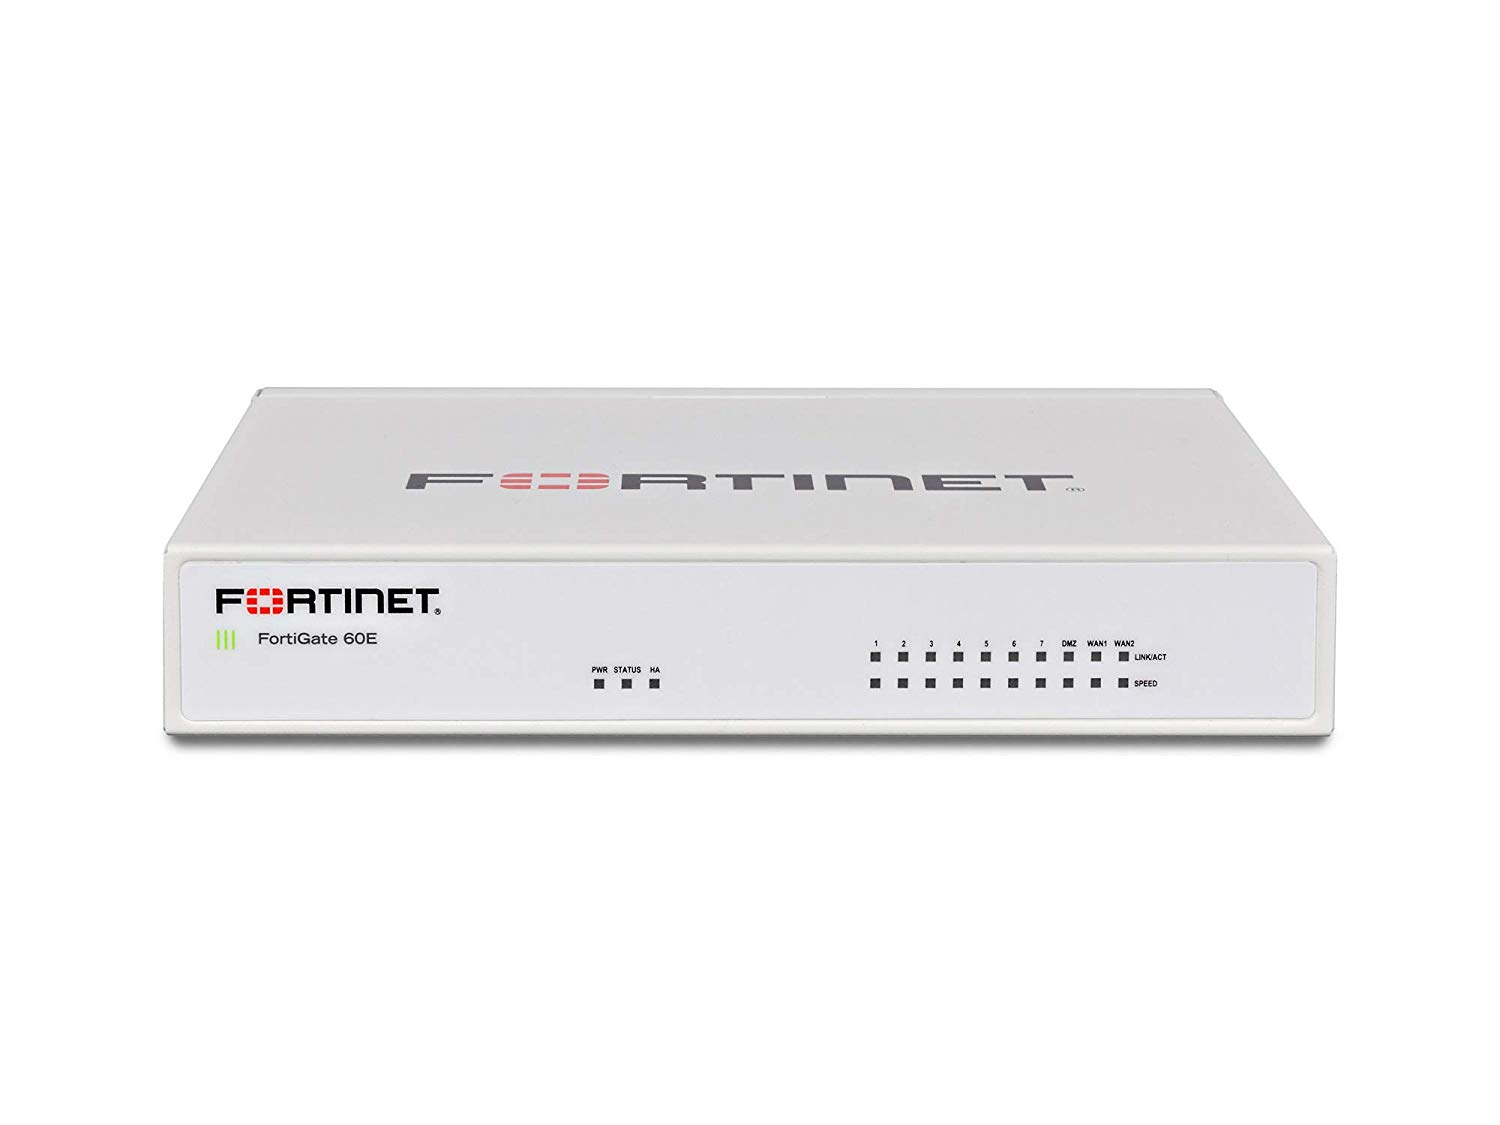 fortinet company information